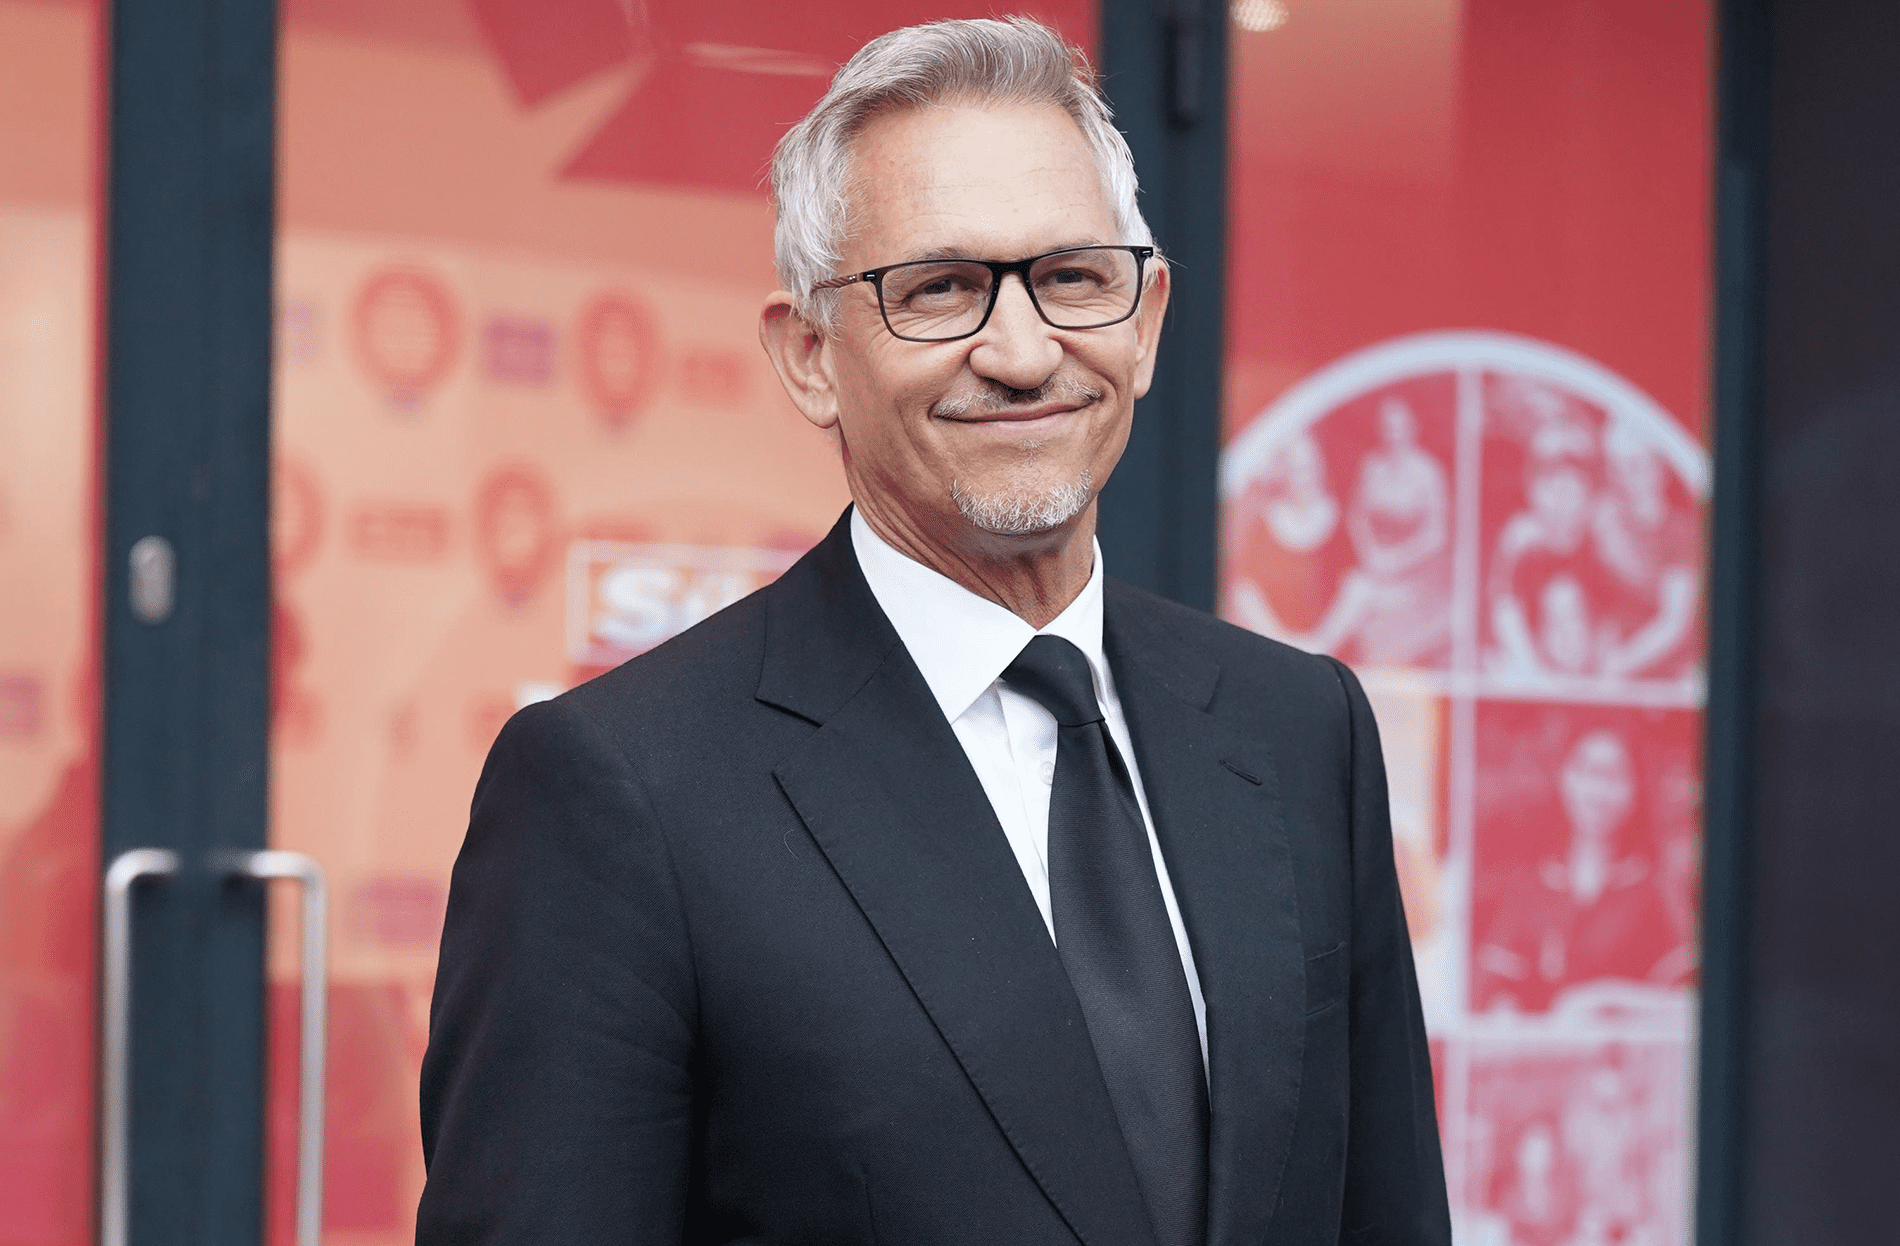 Lineker claim on UK taking ‘far fewer refugees’ than Europe supported by data